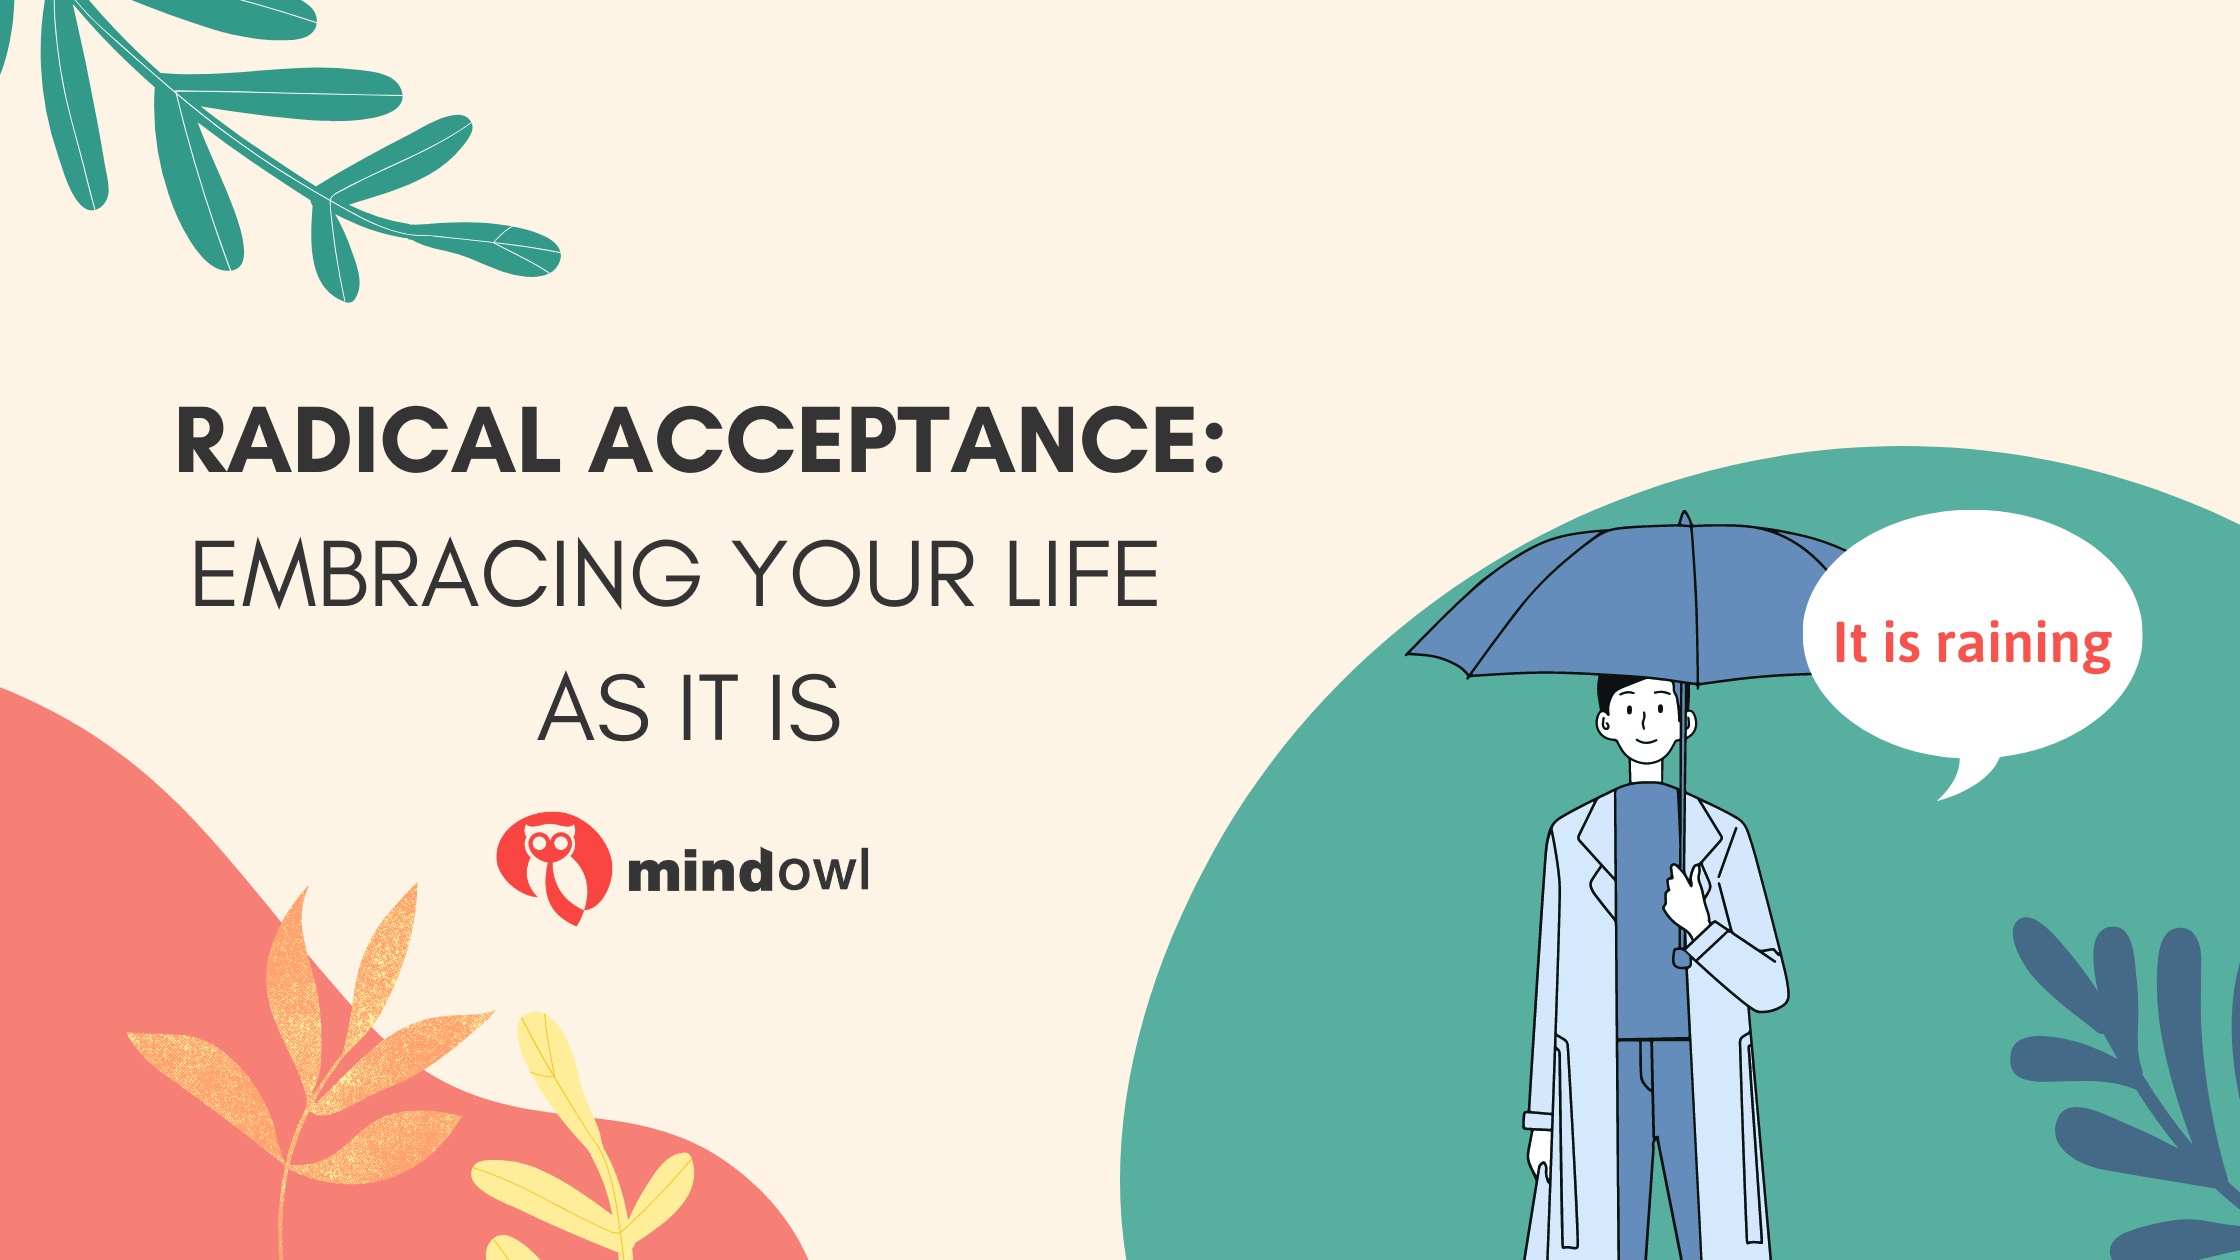 Radical Acceptance: Embracing Your Life as It Is